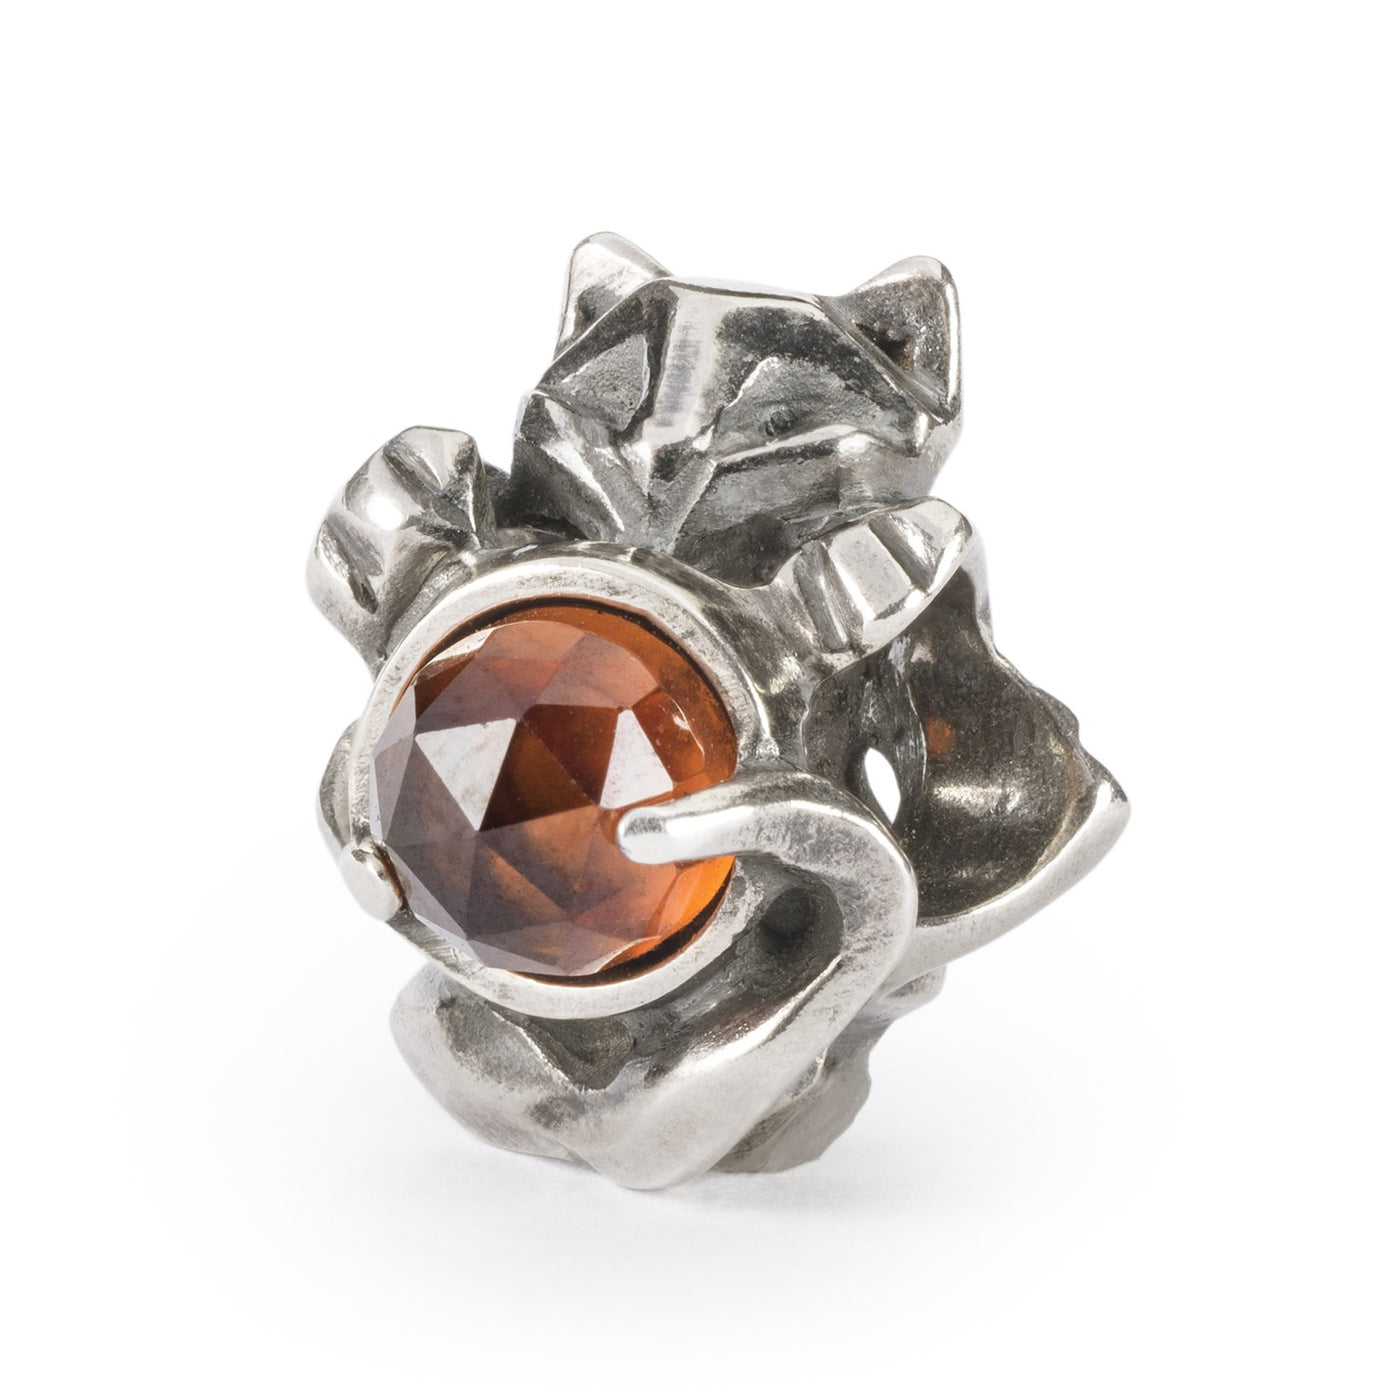 A silver jewellery cat bead playing with a Hessonite stone.